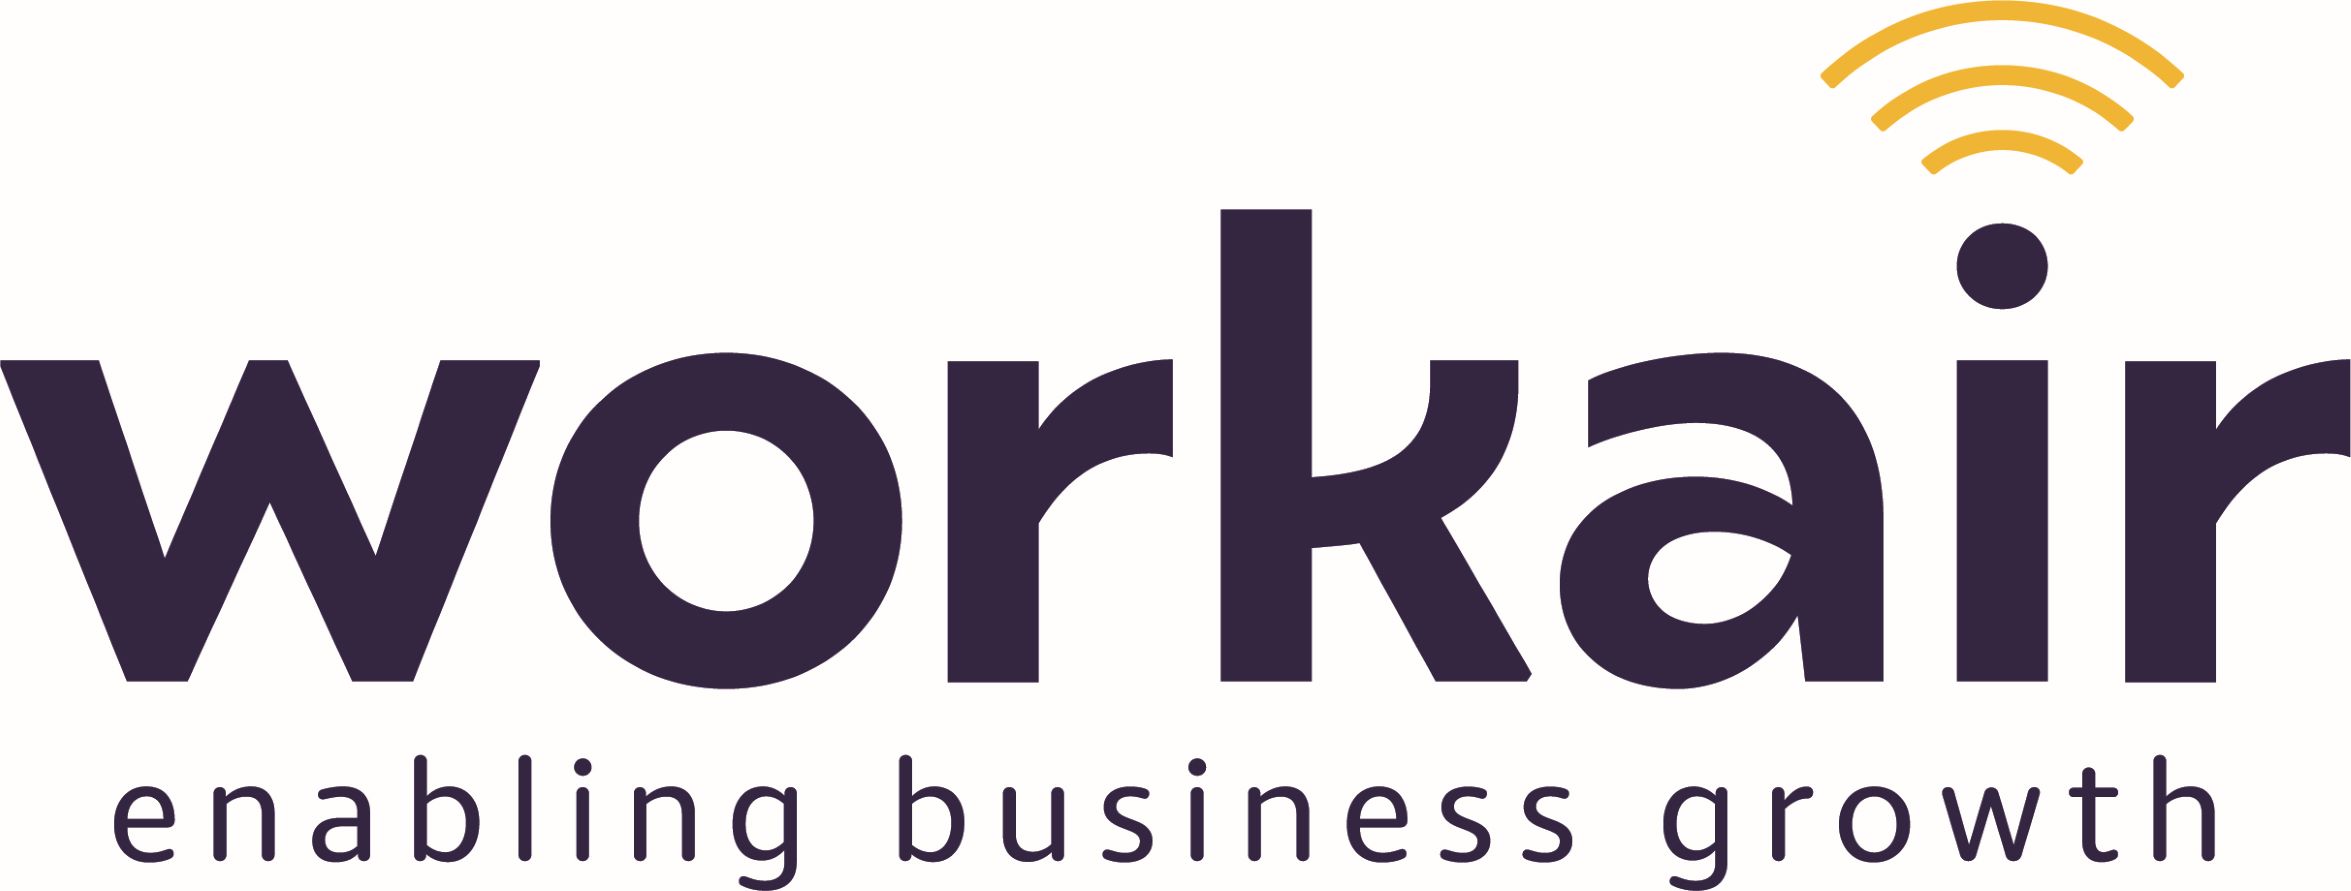 CCMA Sponsor Webinar - Workair Series Featuring 8x8 - CX & Technology Market Predictions for 2023 and beyond